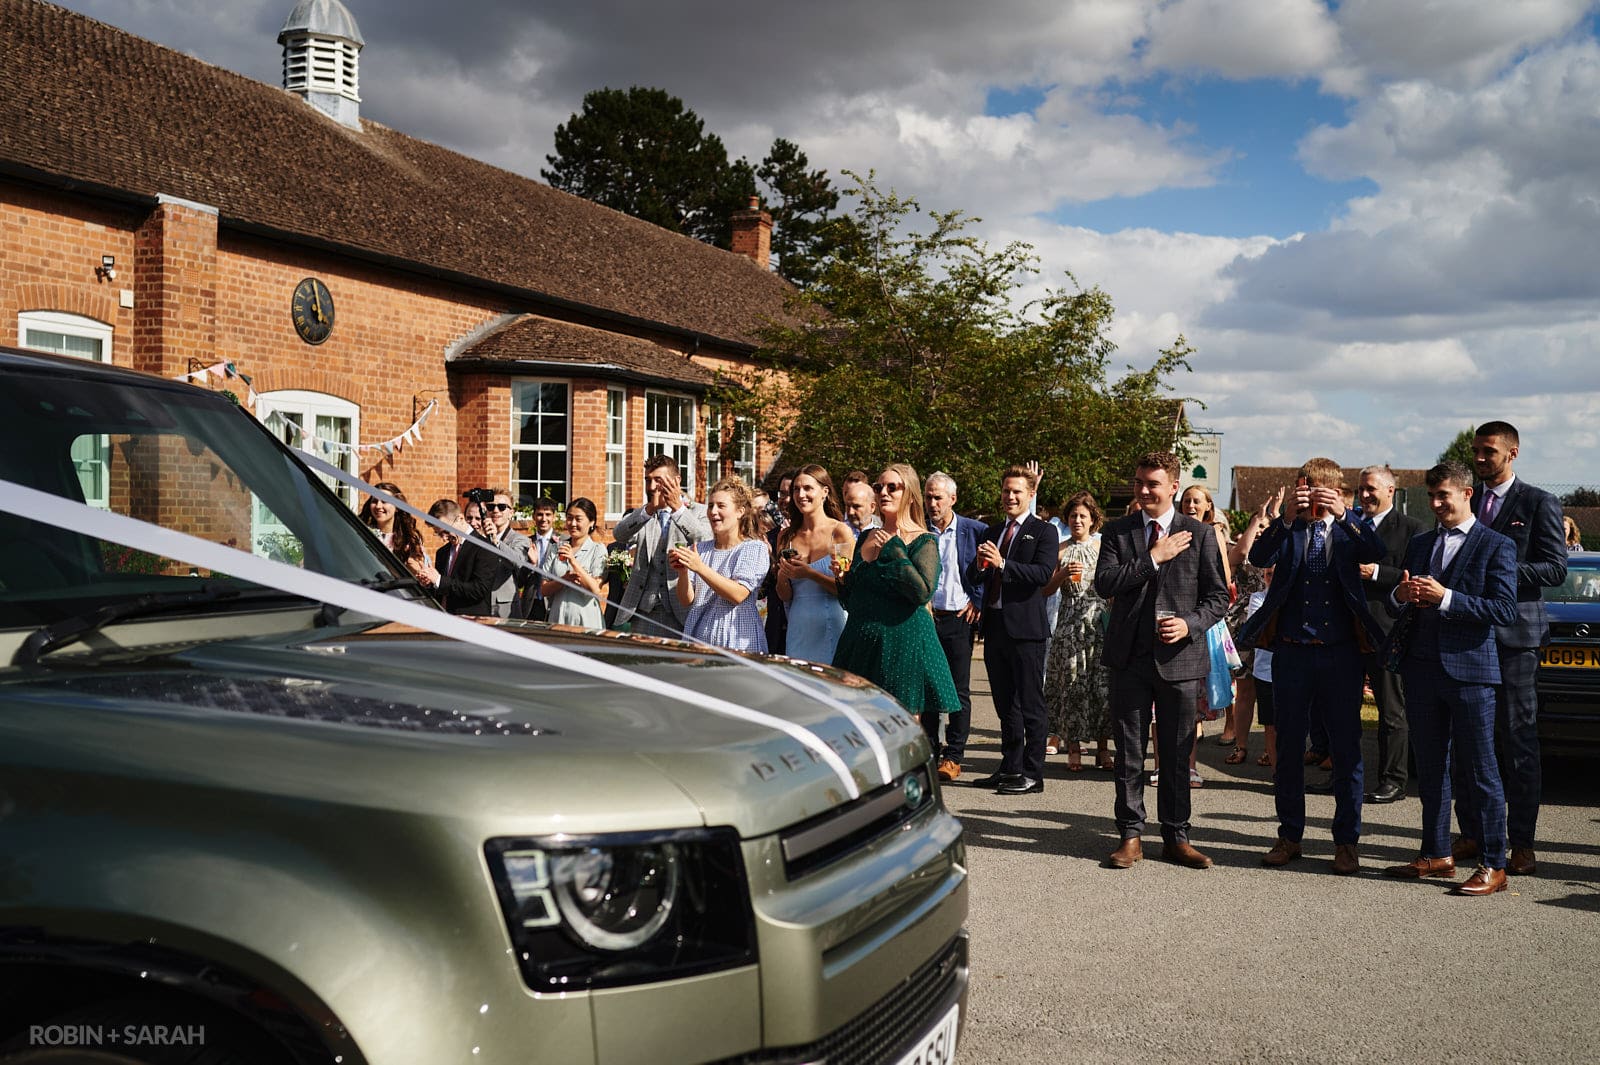 Wedding guests clap as bride and groom arrive in car at village hall